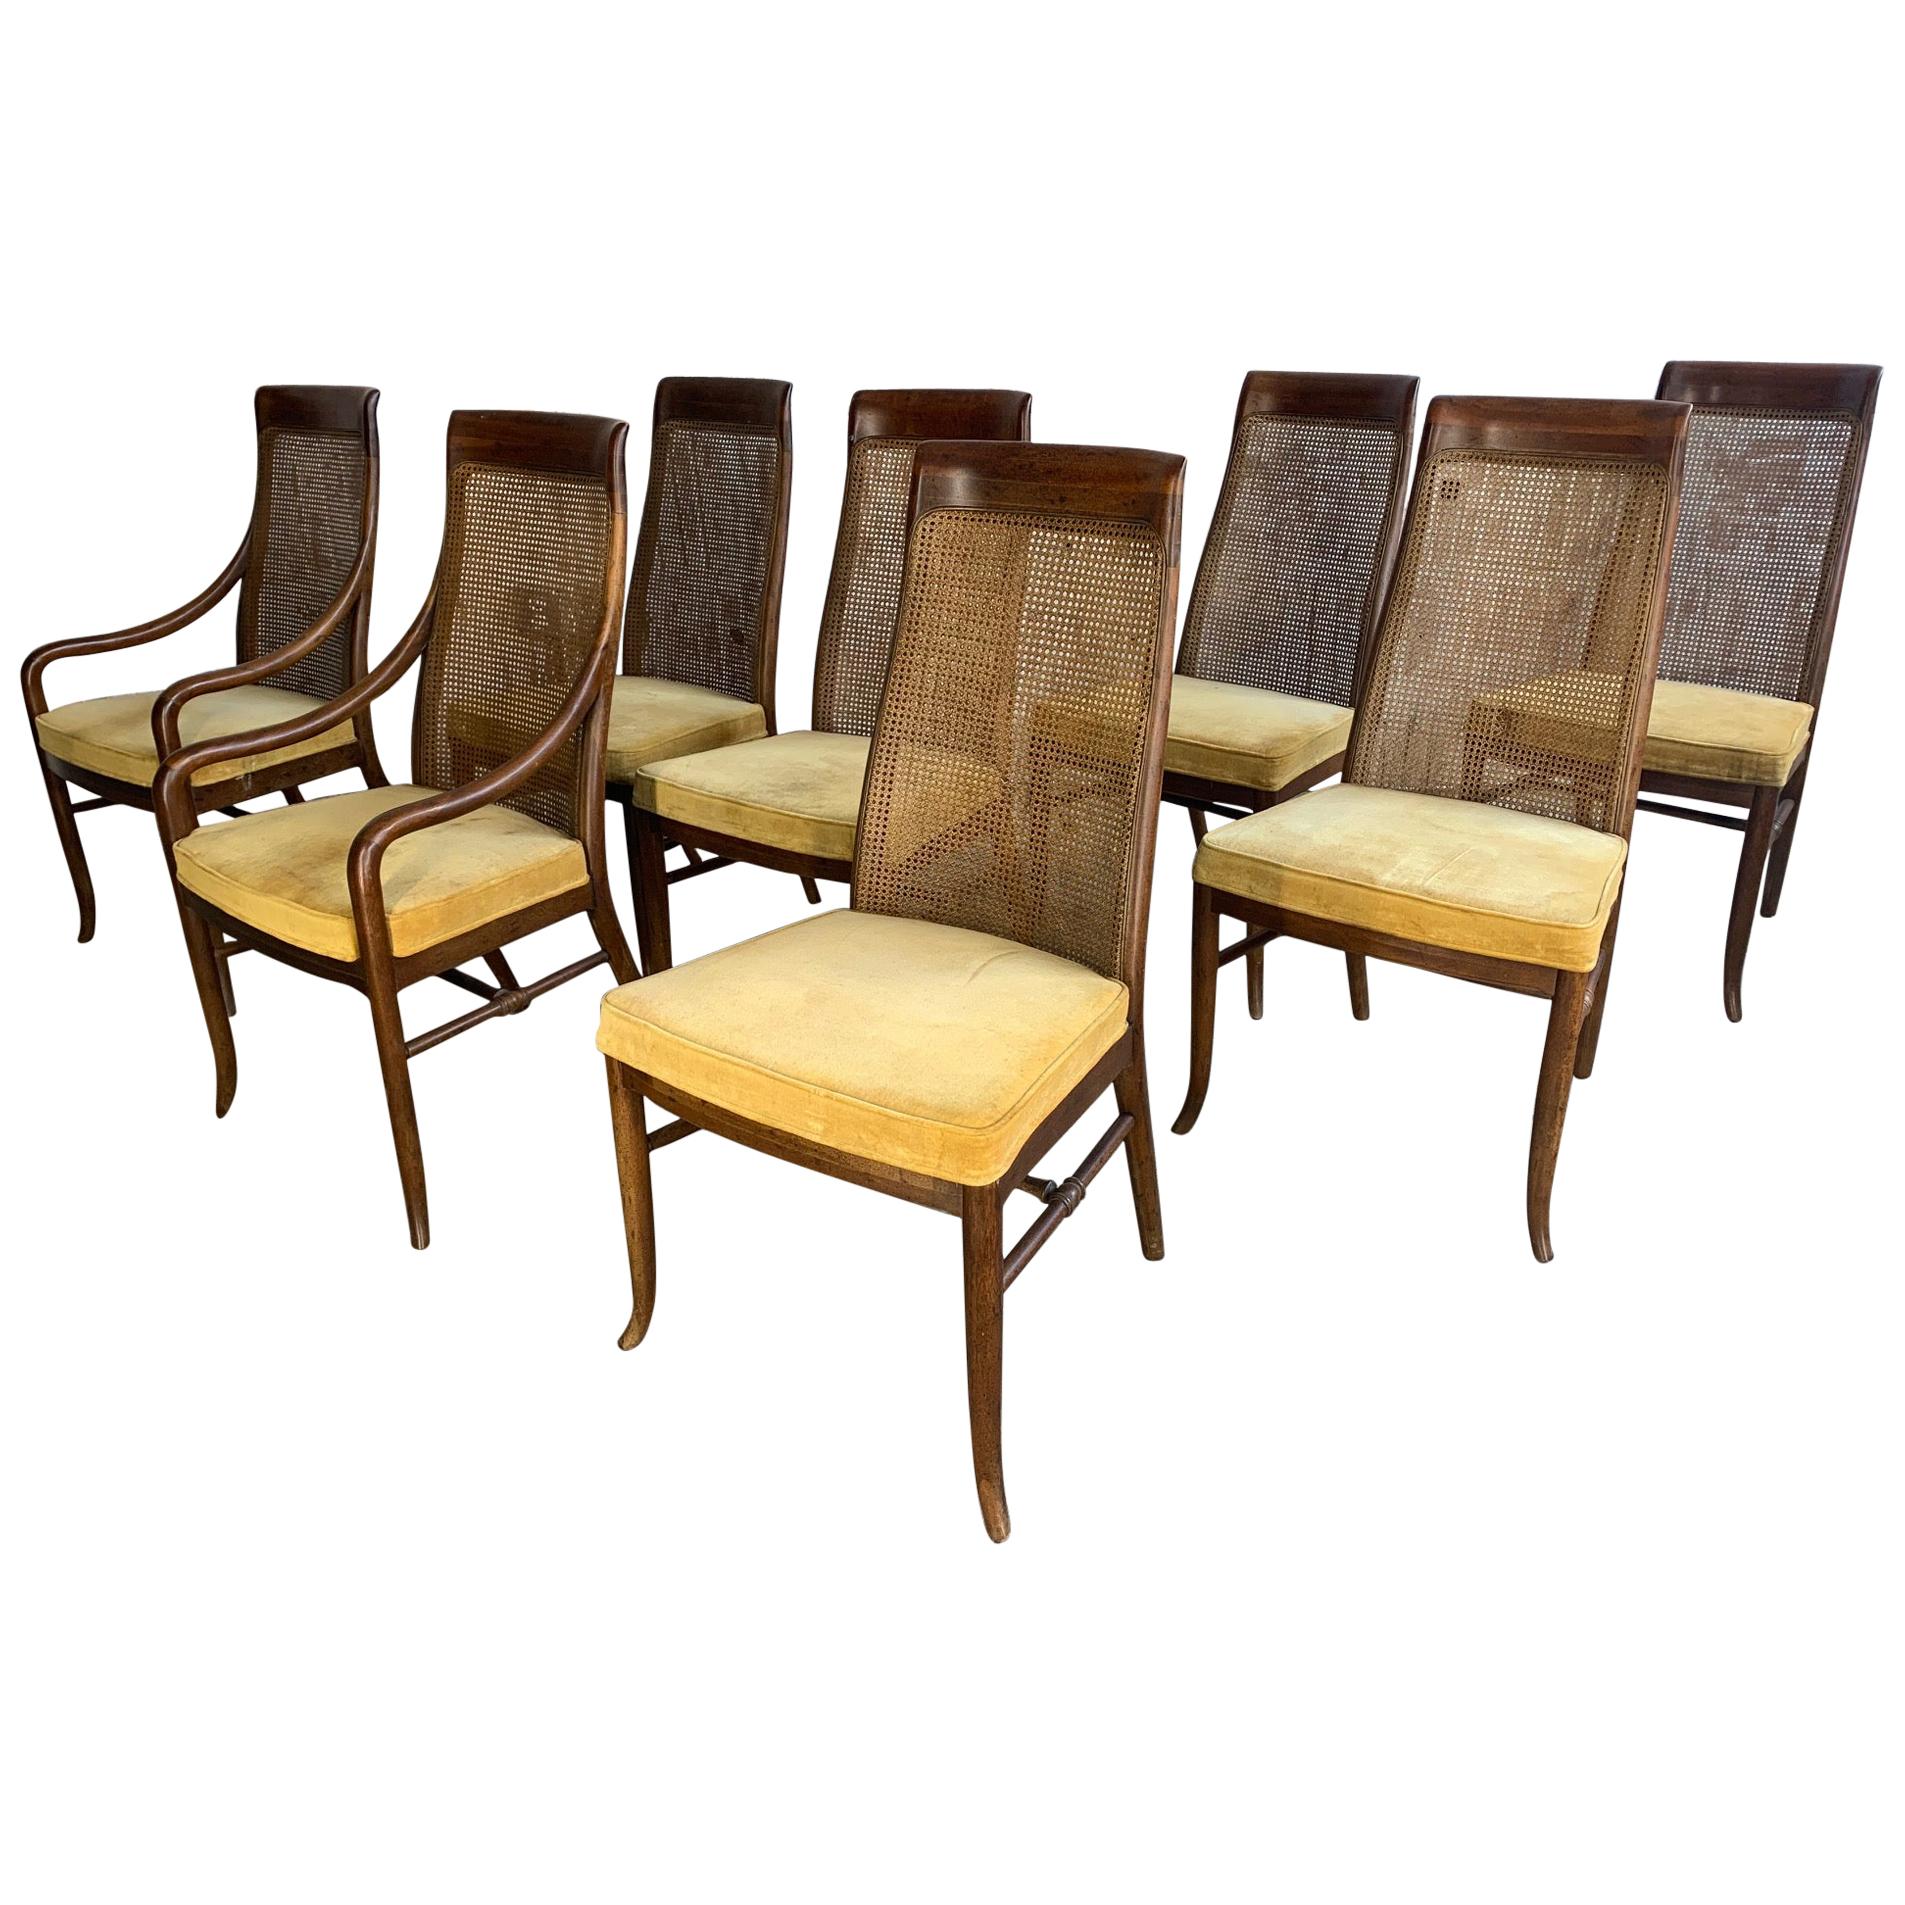 Vintage Cane Back Dining Chairs - magiadeverao